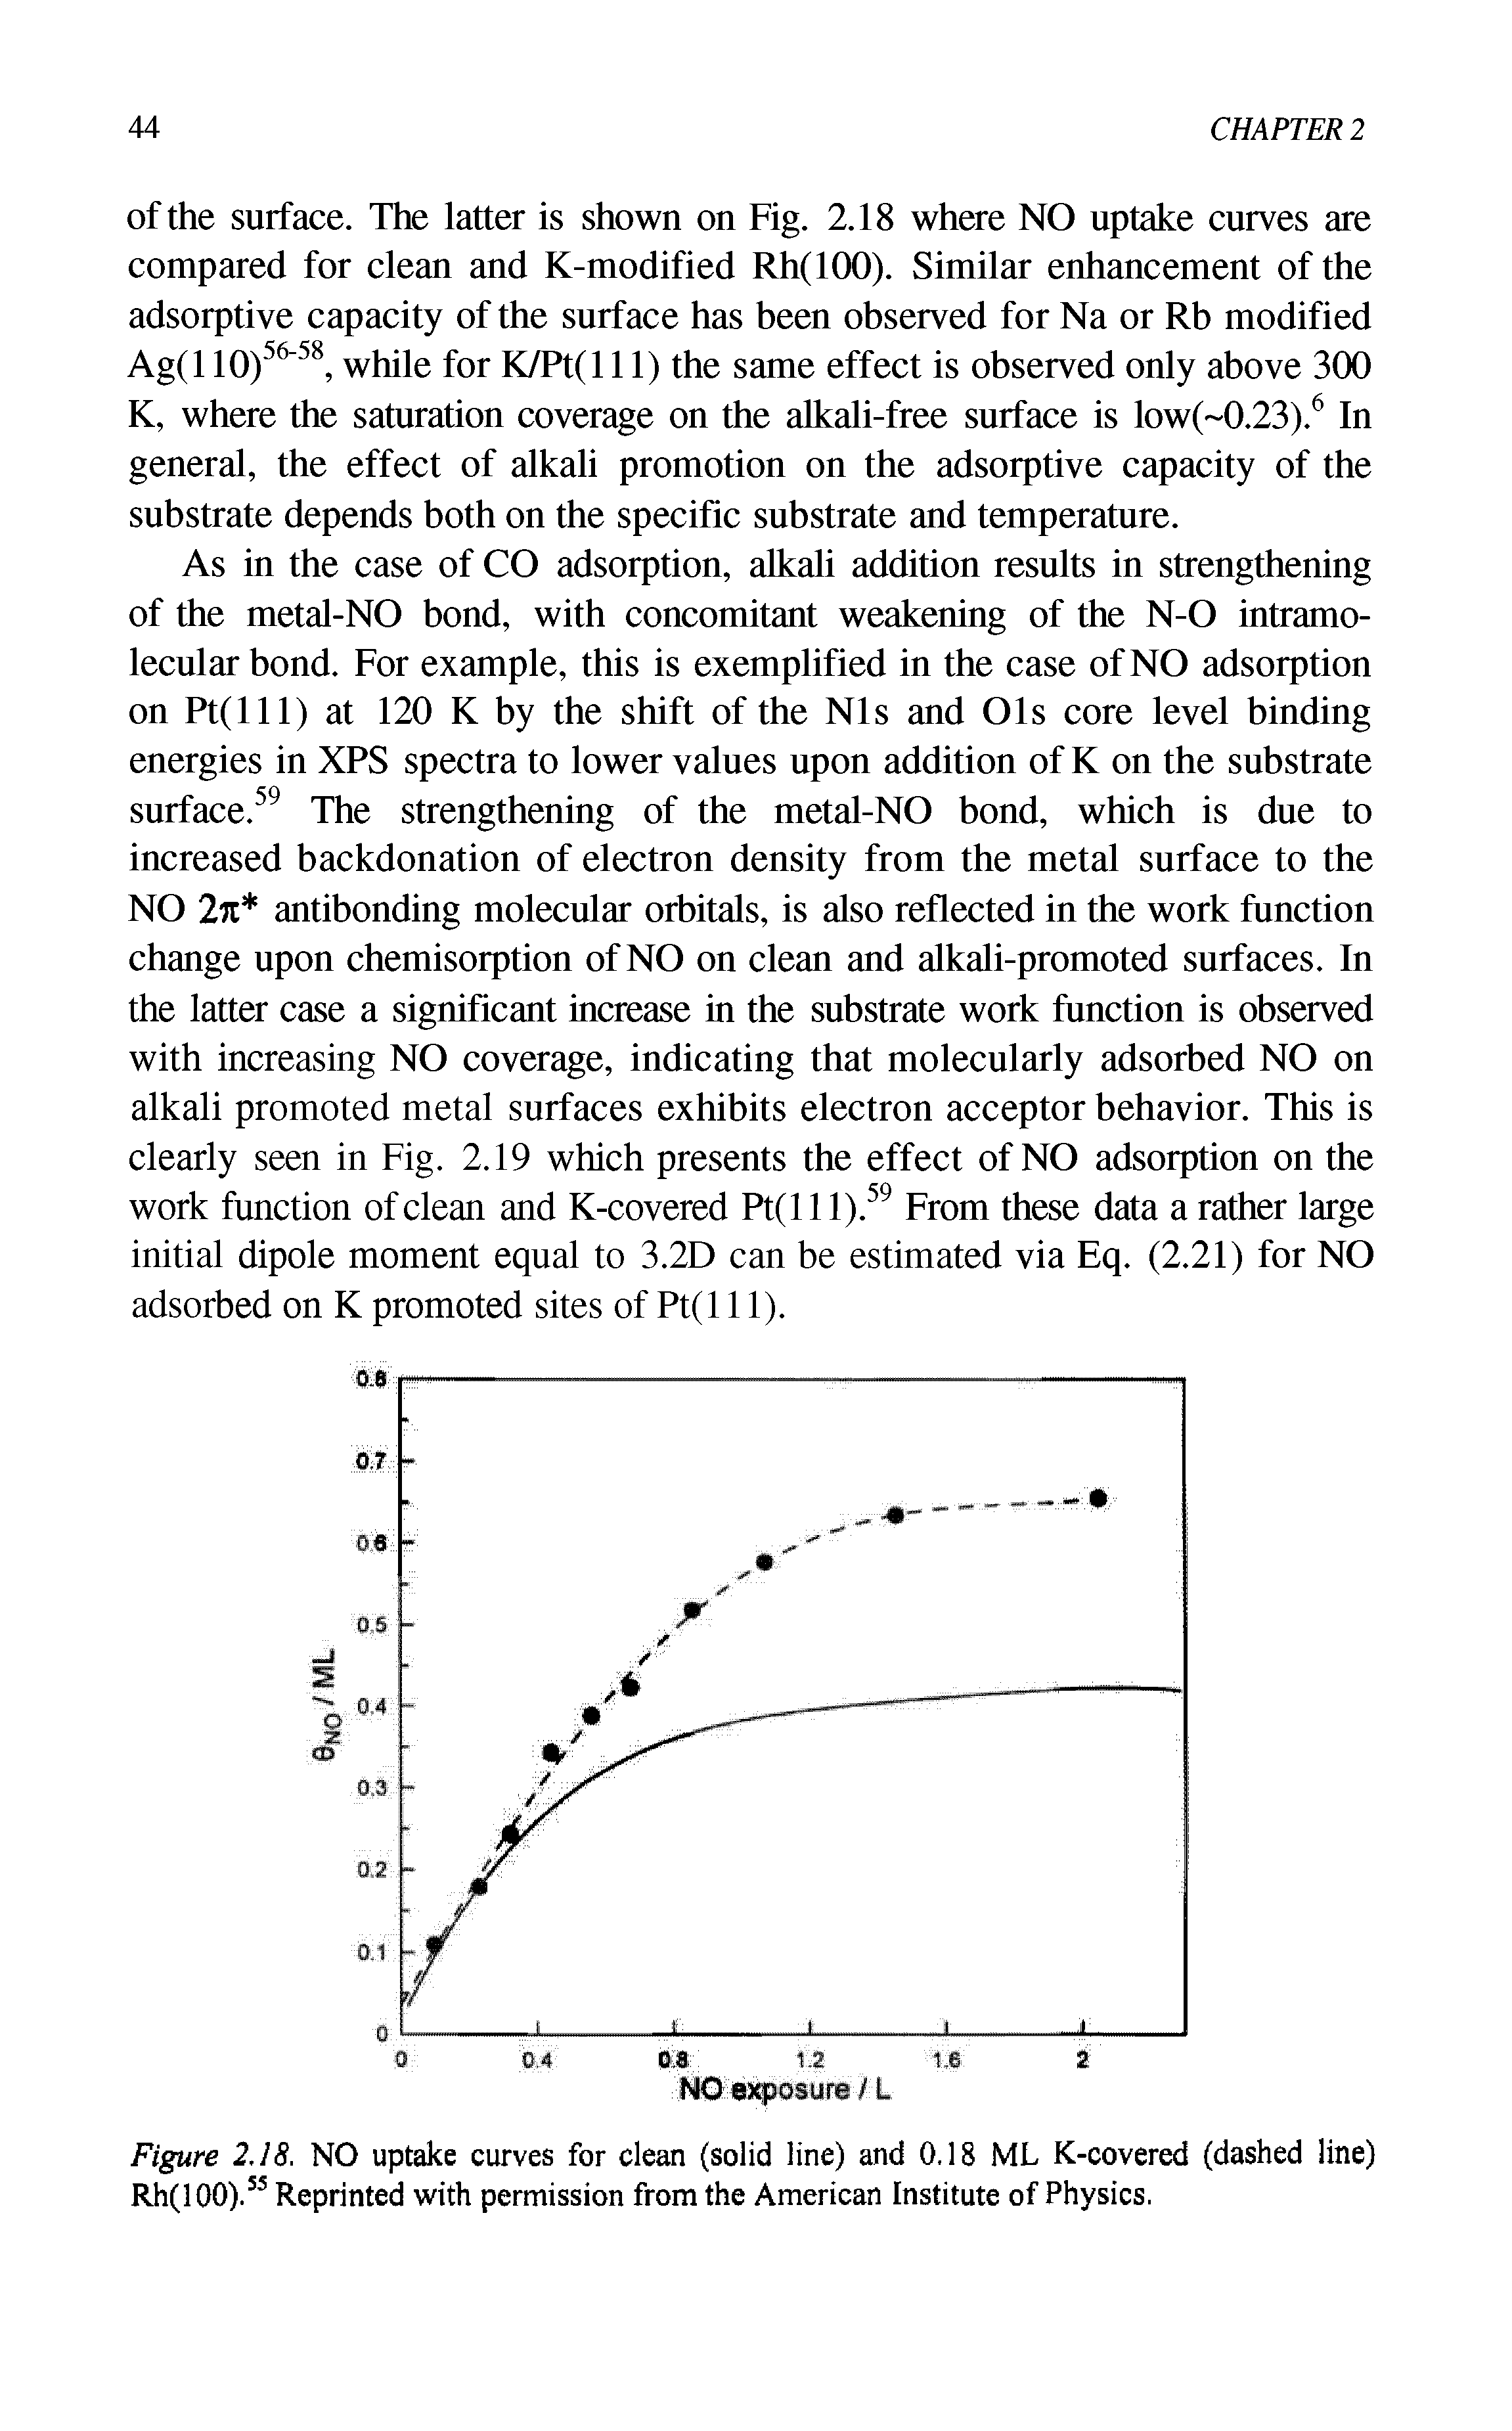 Figure 2.18. NO uptake curves for clean (solid line) and 0.18 ML K-covered (dashed line) Rh(100).55 Reprinted with permission from the American Institute of Physics.